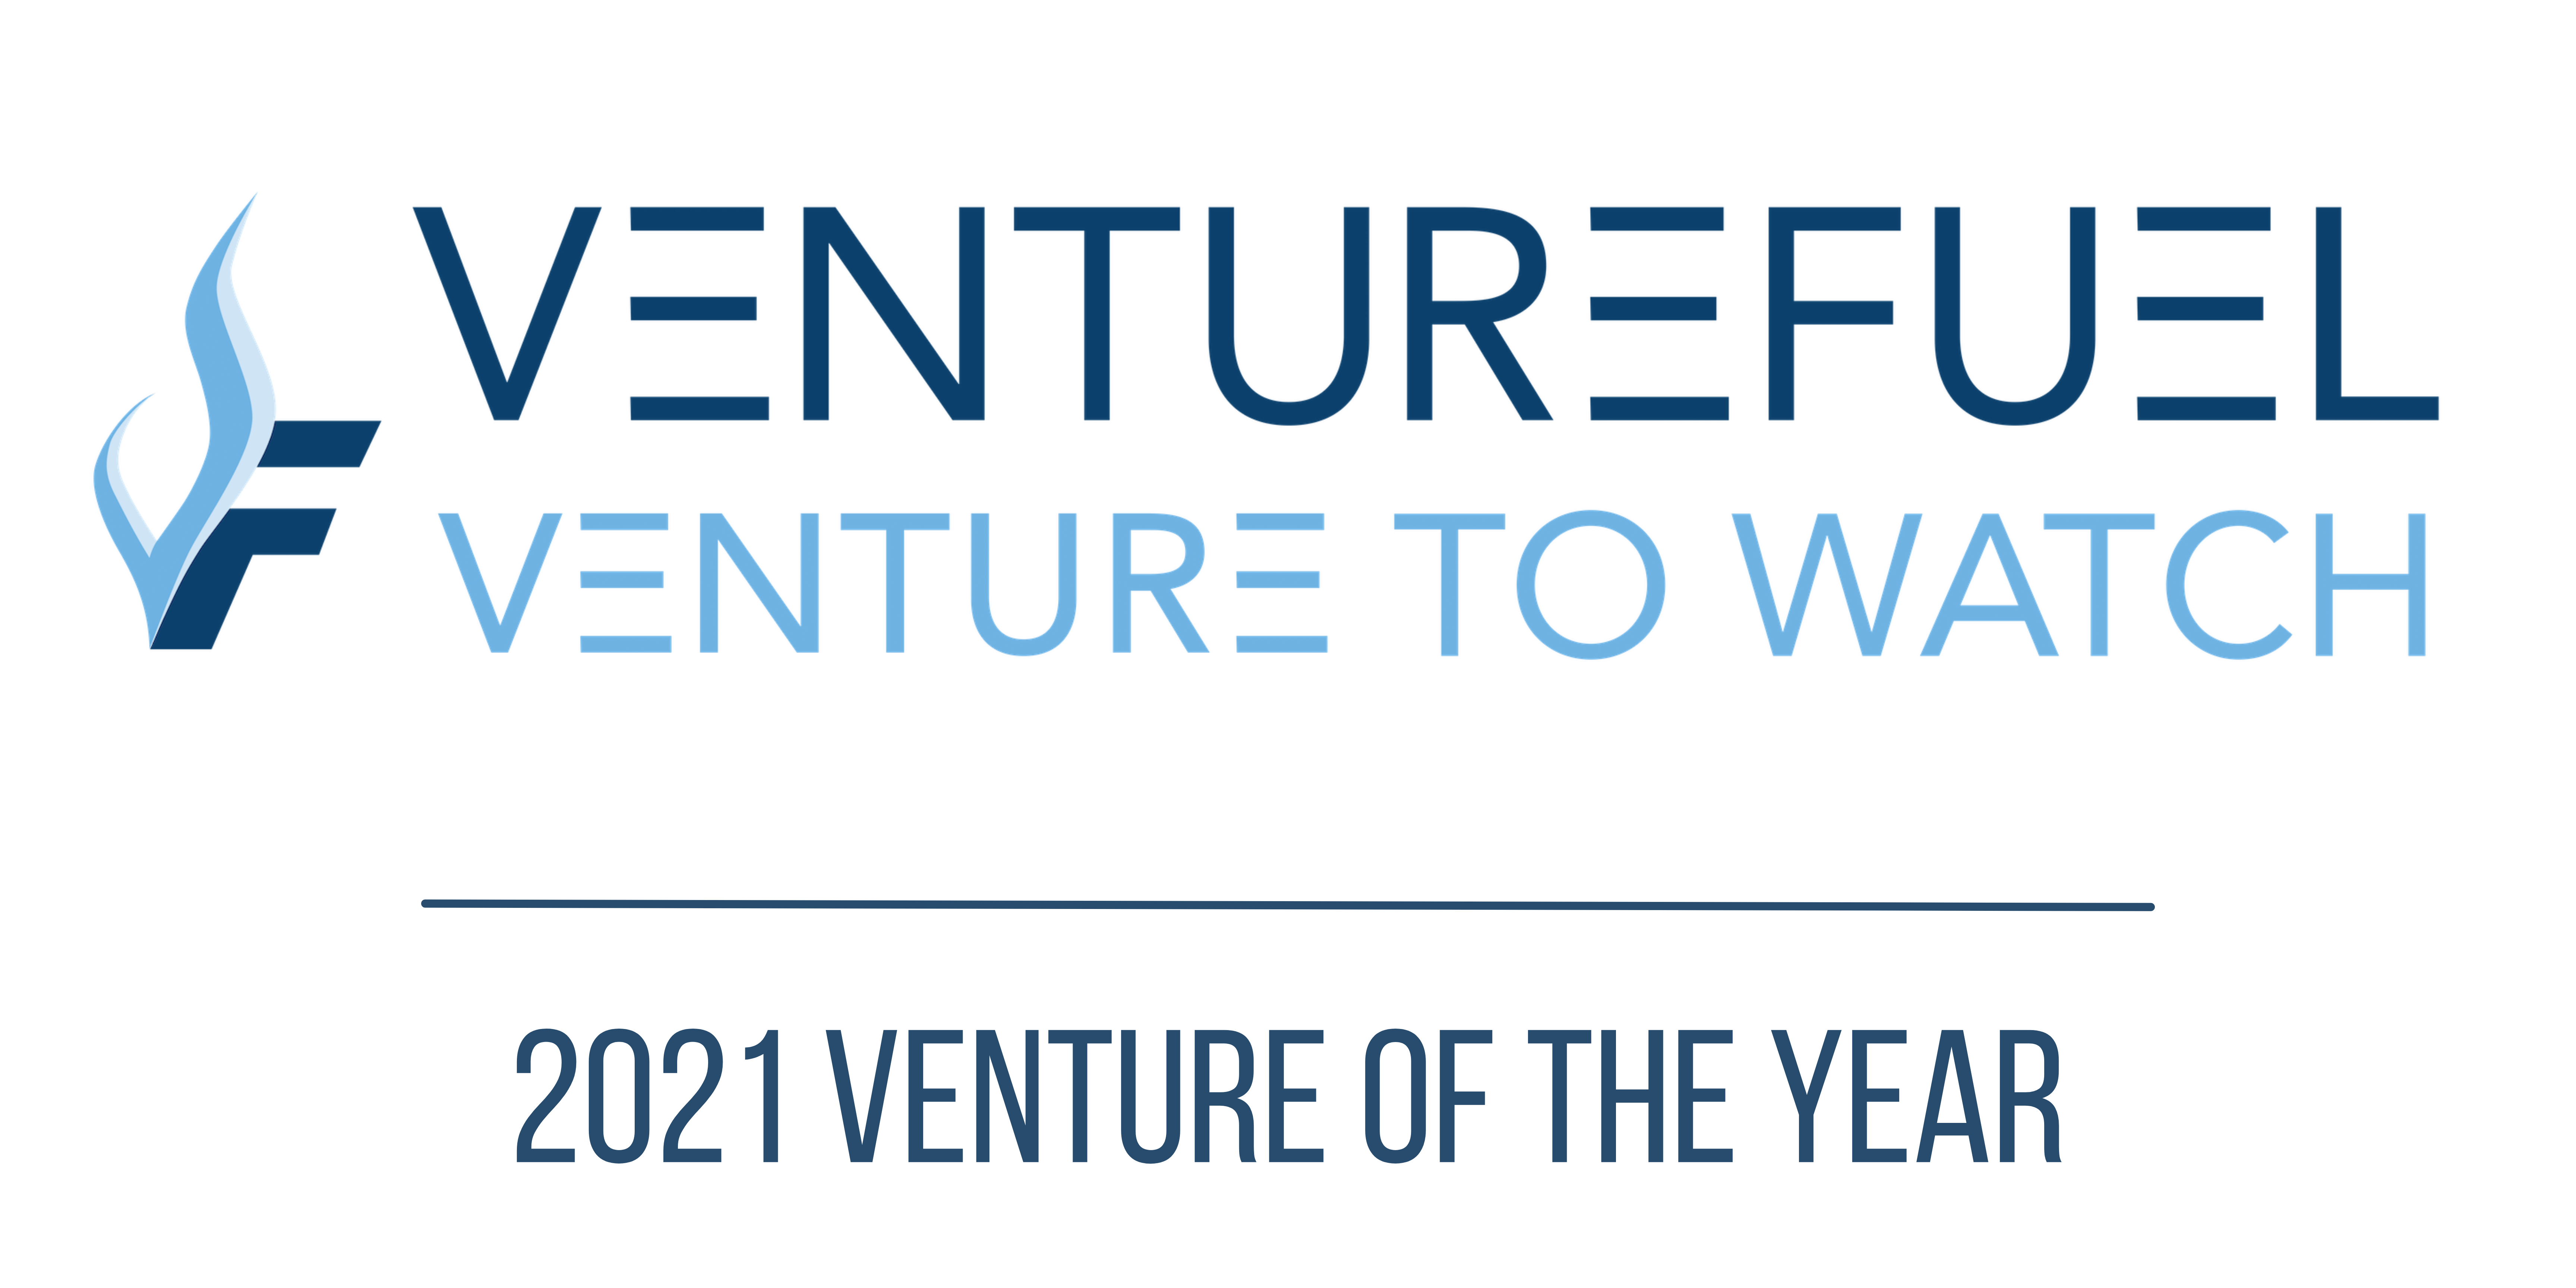 2021 Venture Of the Year